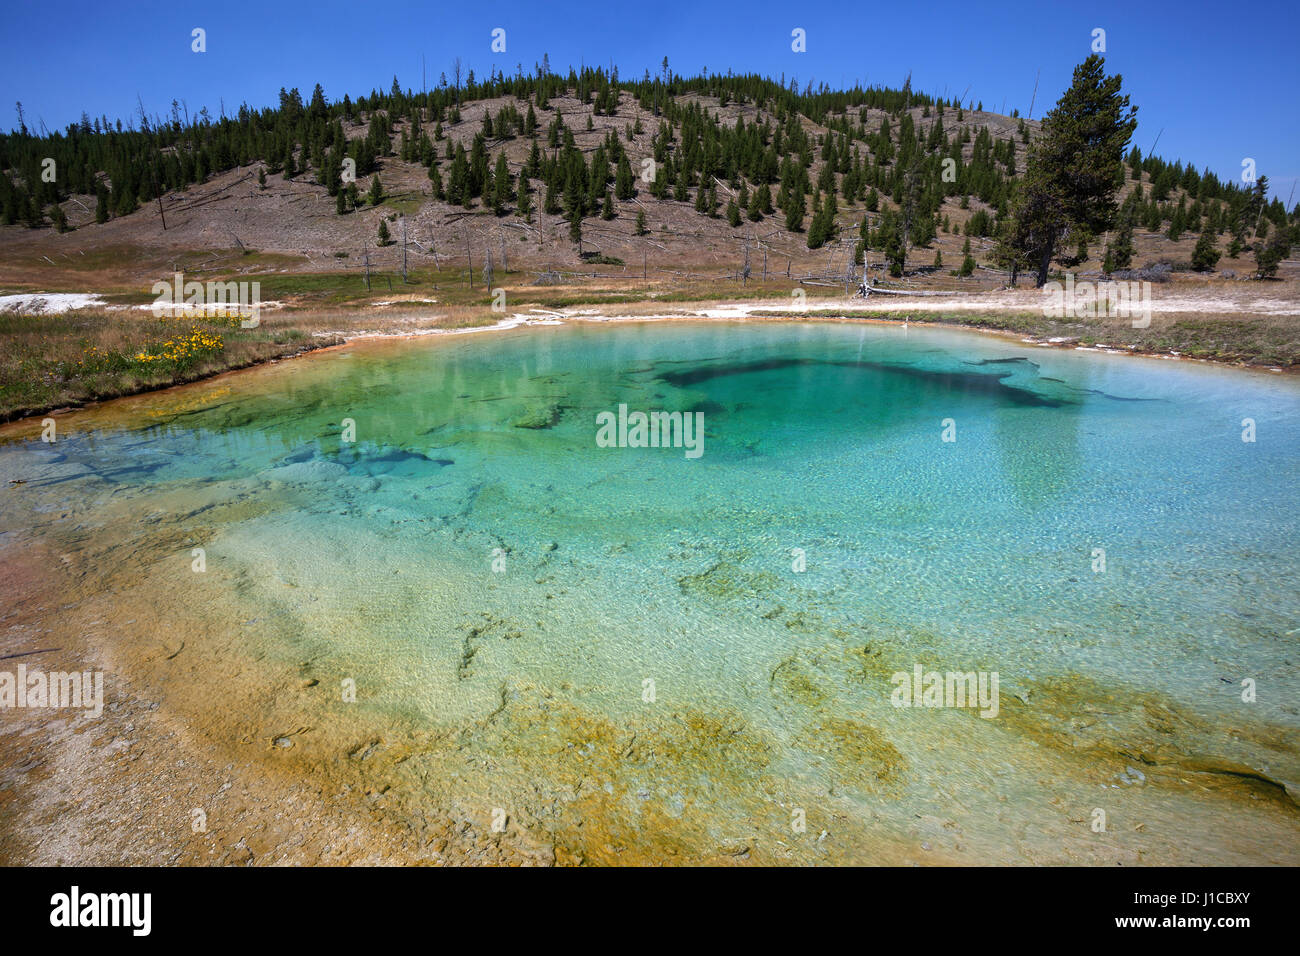 Hot spring, Midway Geyser Basin, Yellowstone National Park, Wyoming, USA Stock Photo